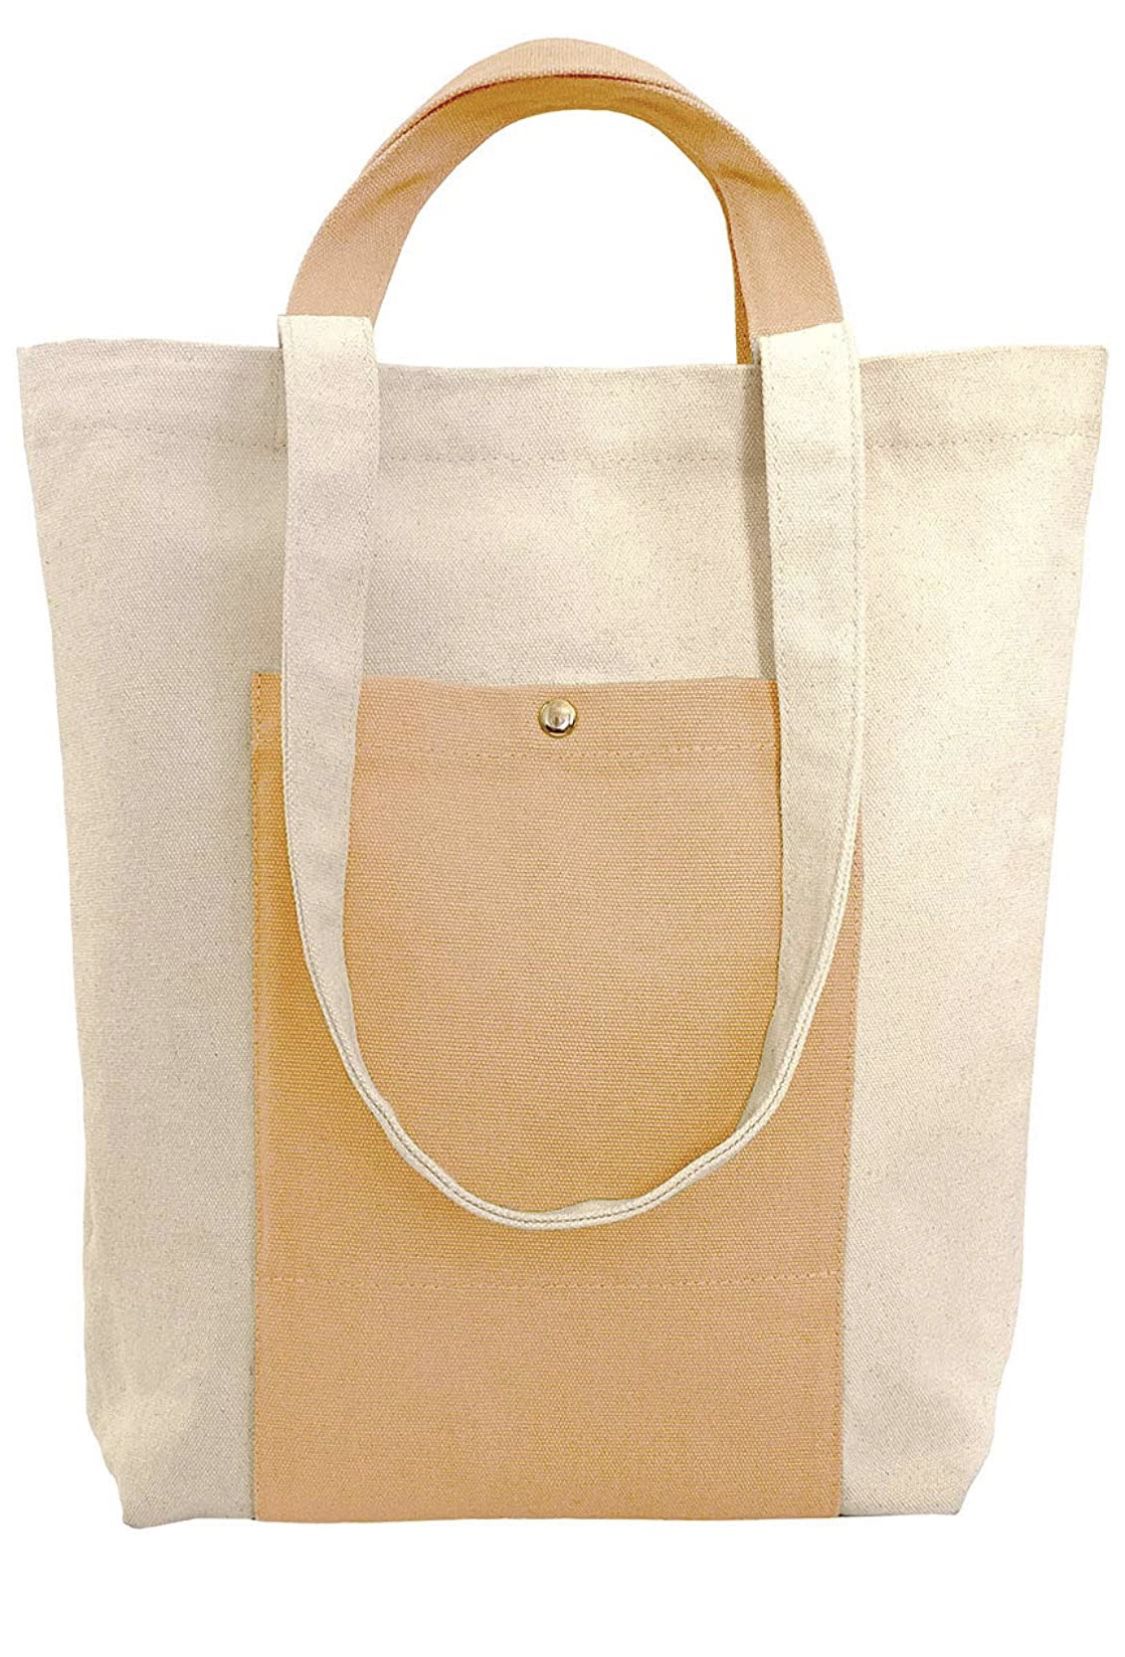 Heavy Duty Canvas Two-Tone Tote Shoulder Bag for Women with Handles for Shopping, Work, School & Gym